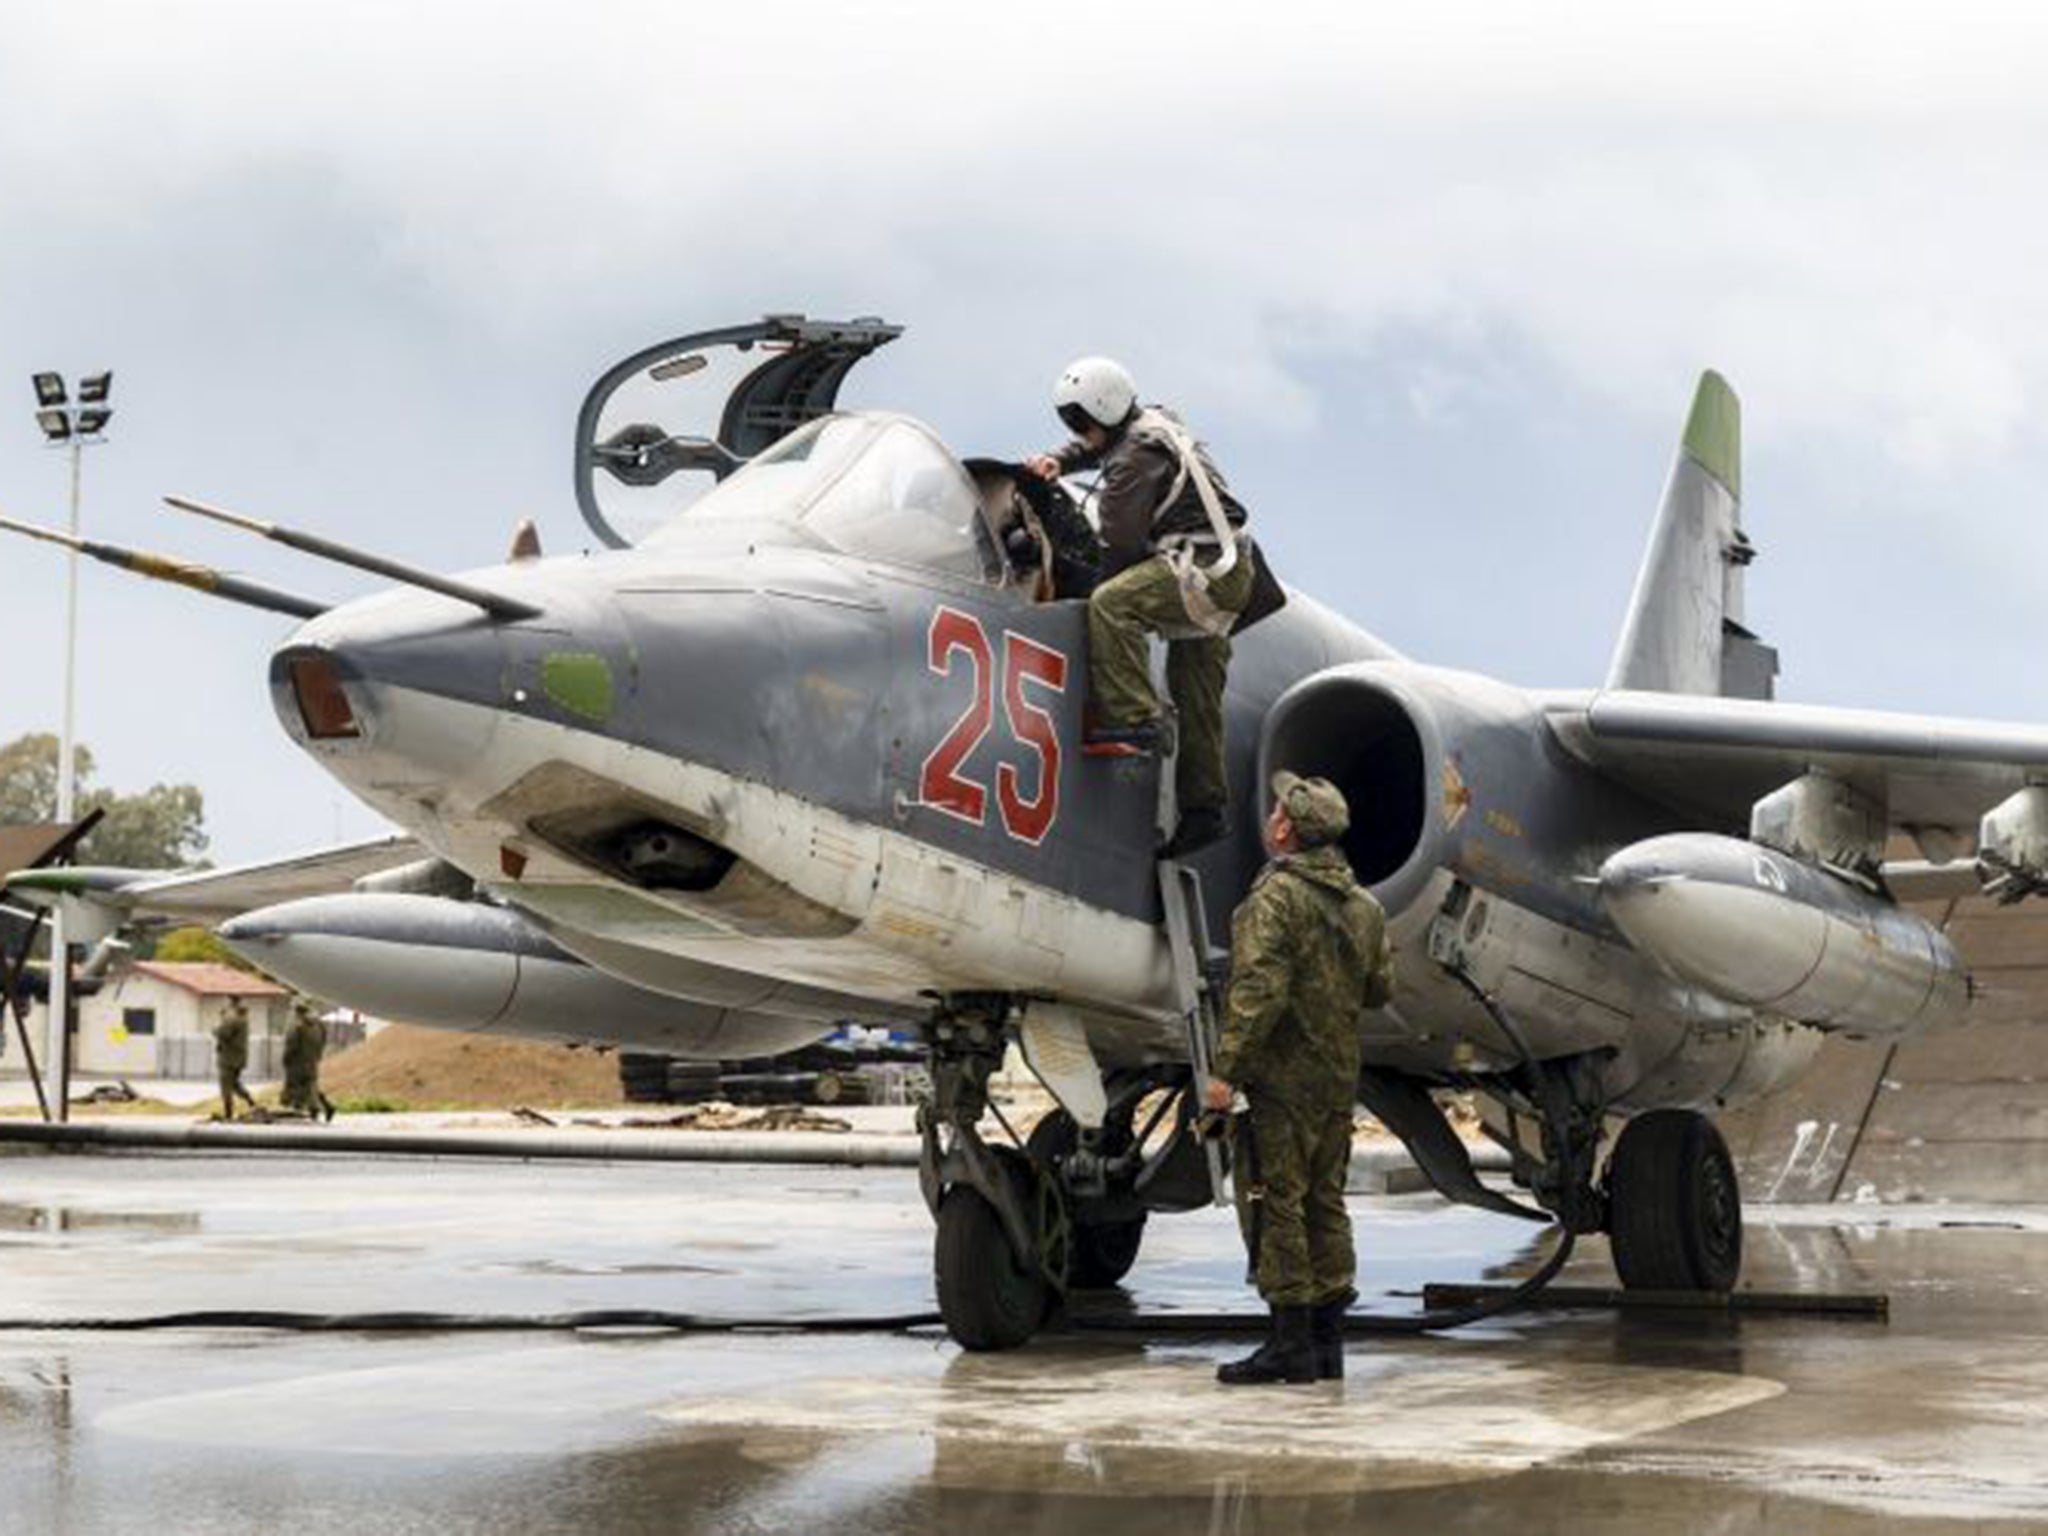 On standby: Russian fighter jets remain in Syria to bolster the Assad regime